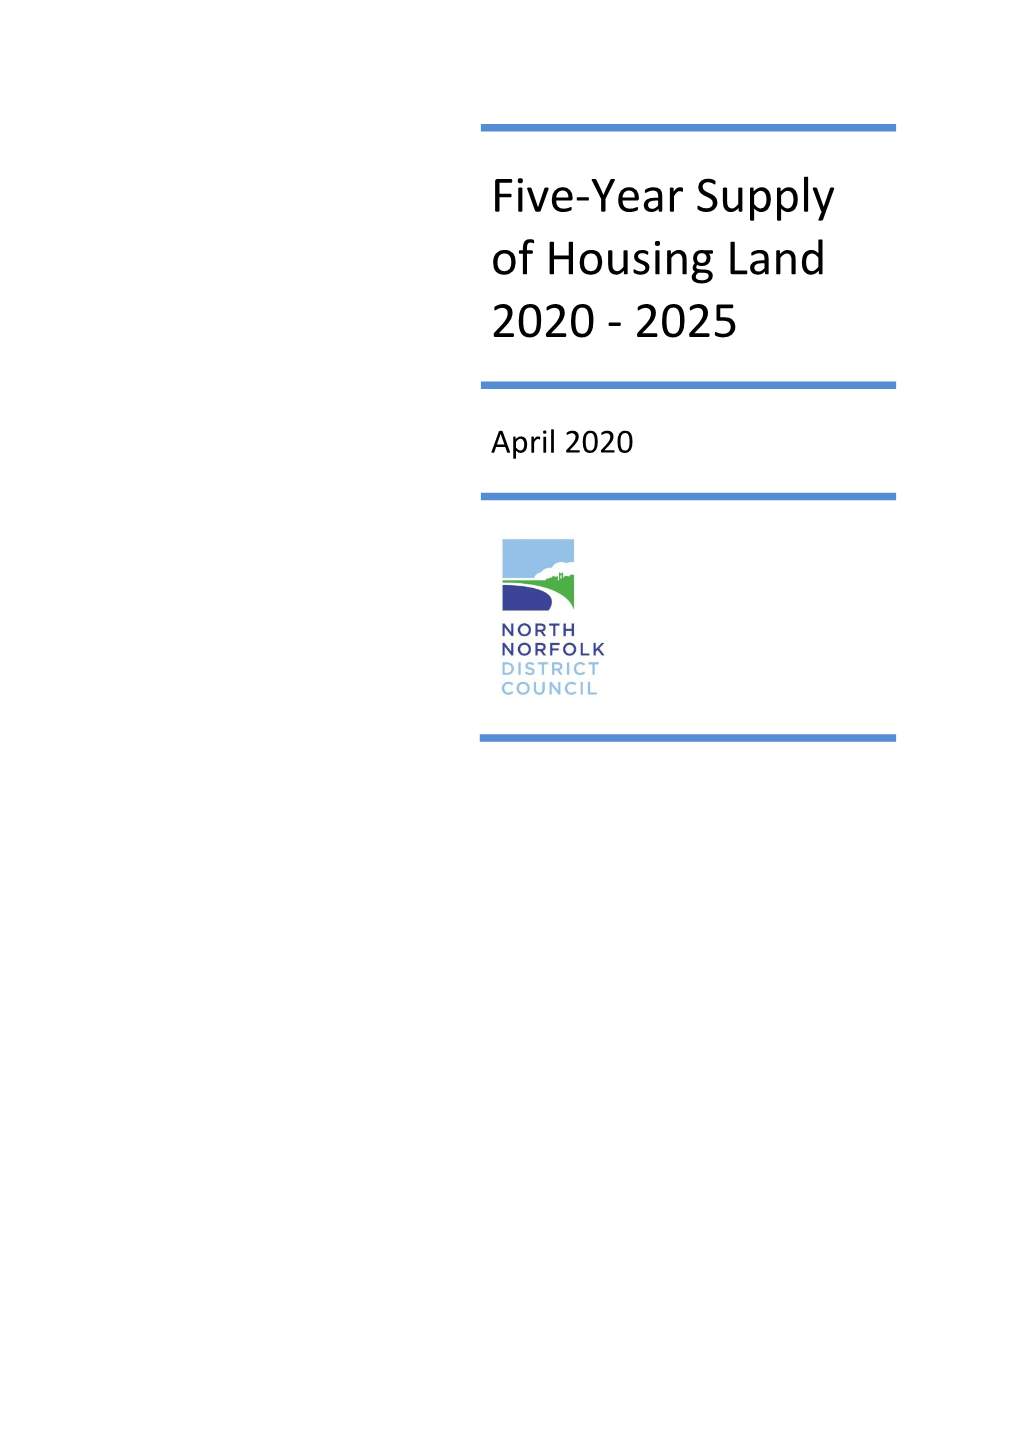 Five-Year Supply of Housing Land 2020 - 2025